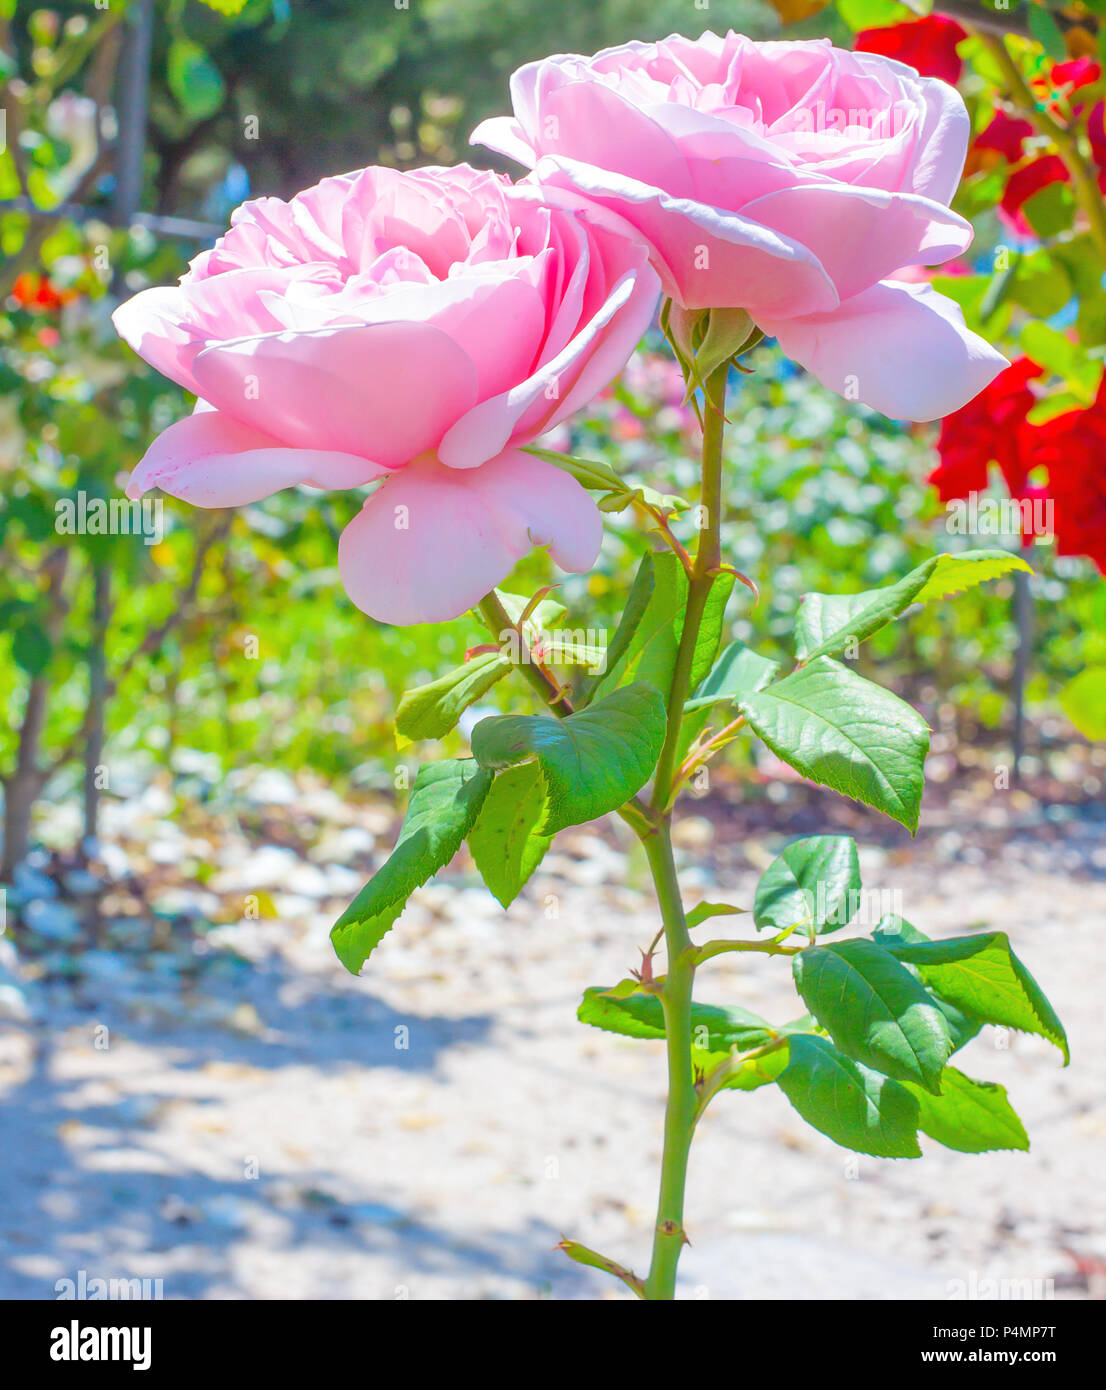 colorful, beautiful, delicate rose in the garden, roses flower